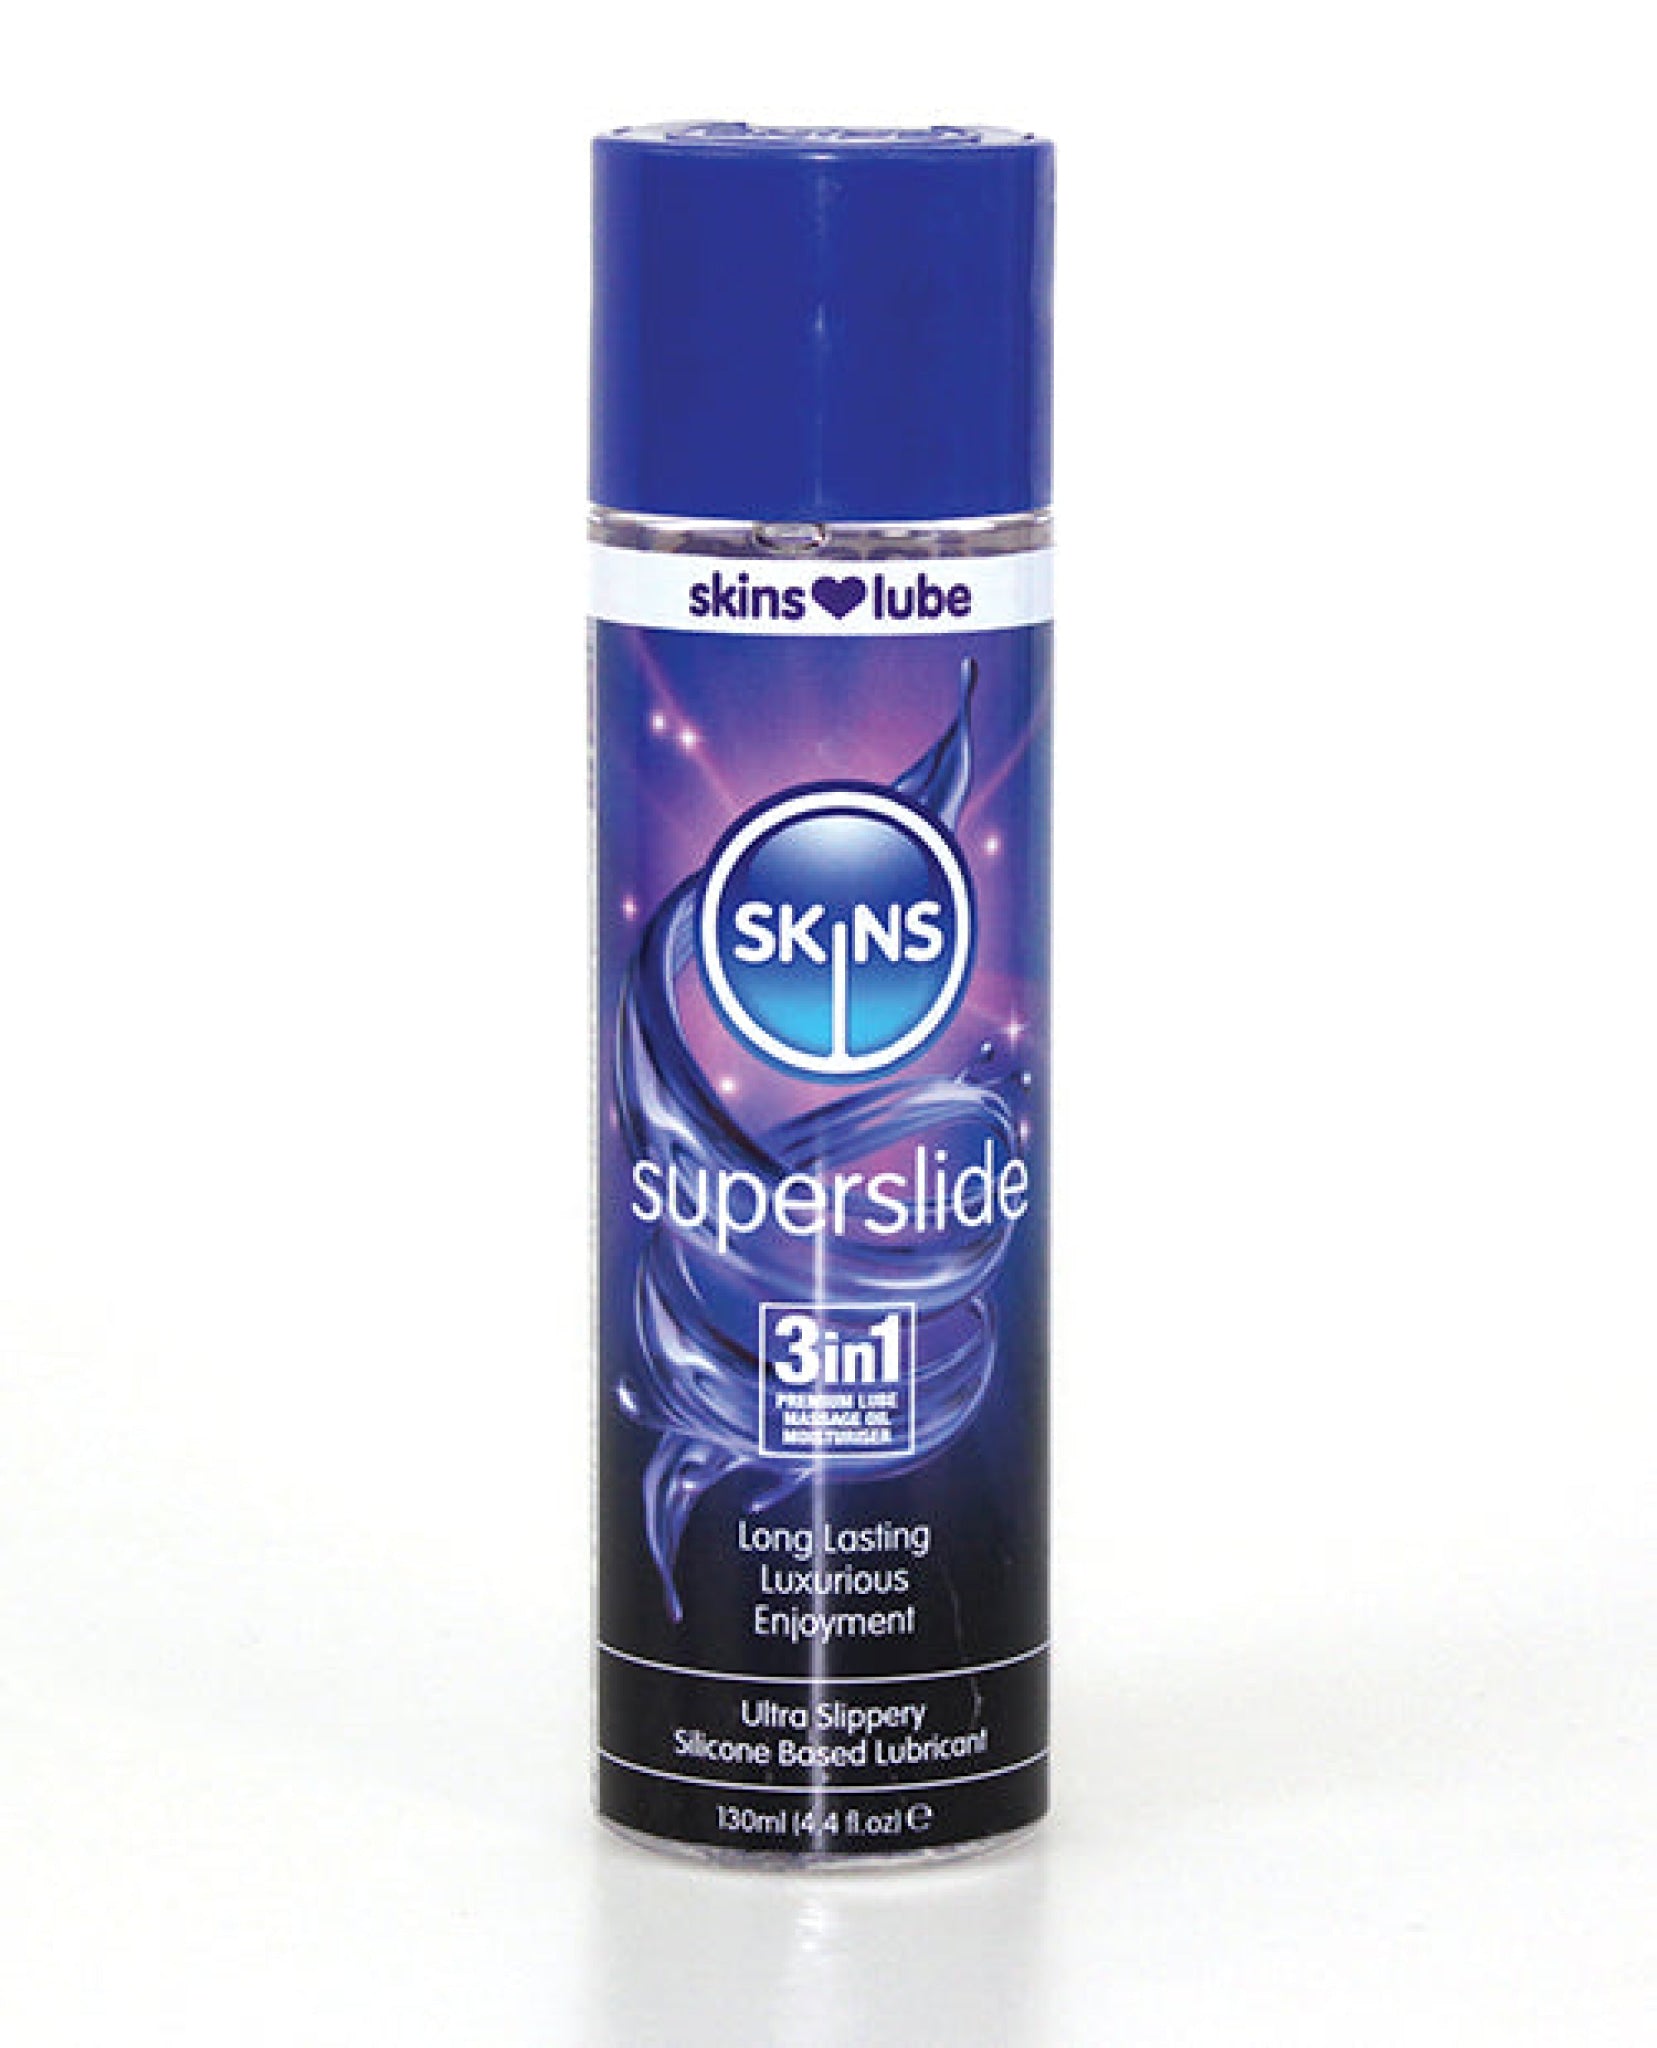 Skins Superslide Silicone Based Lubricant - 4.4 Oz Creative Conceptions